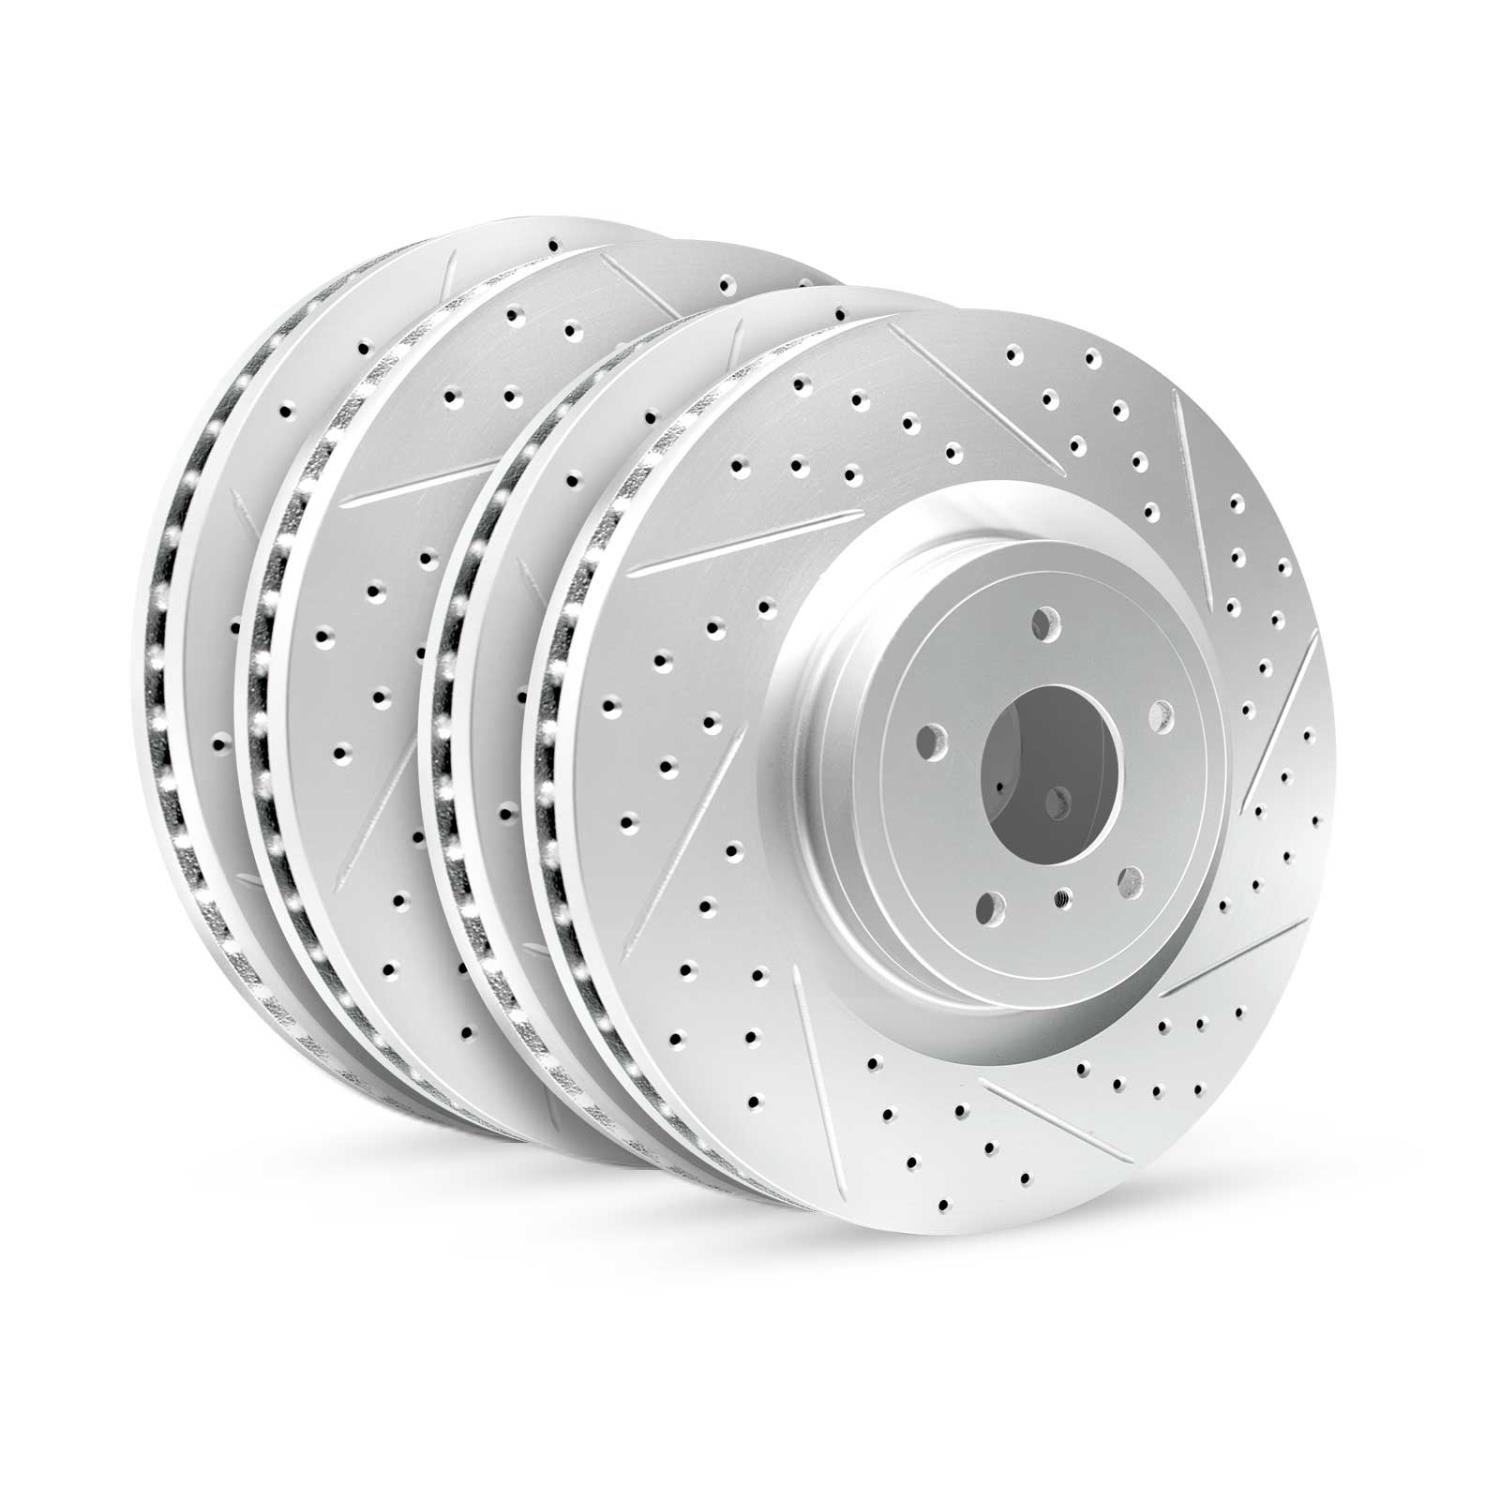 GEO-Carbon Drilled/Slotted Rotors, 2014-2018 Subaru, Position: